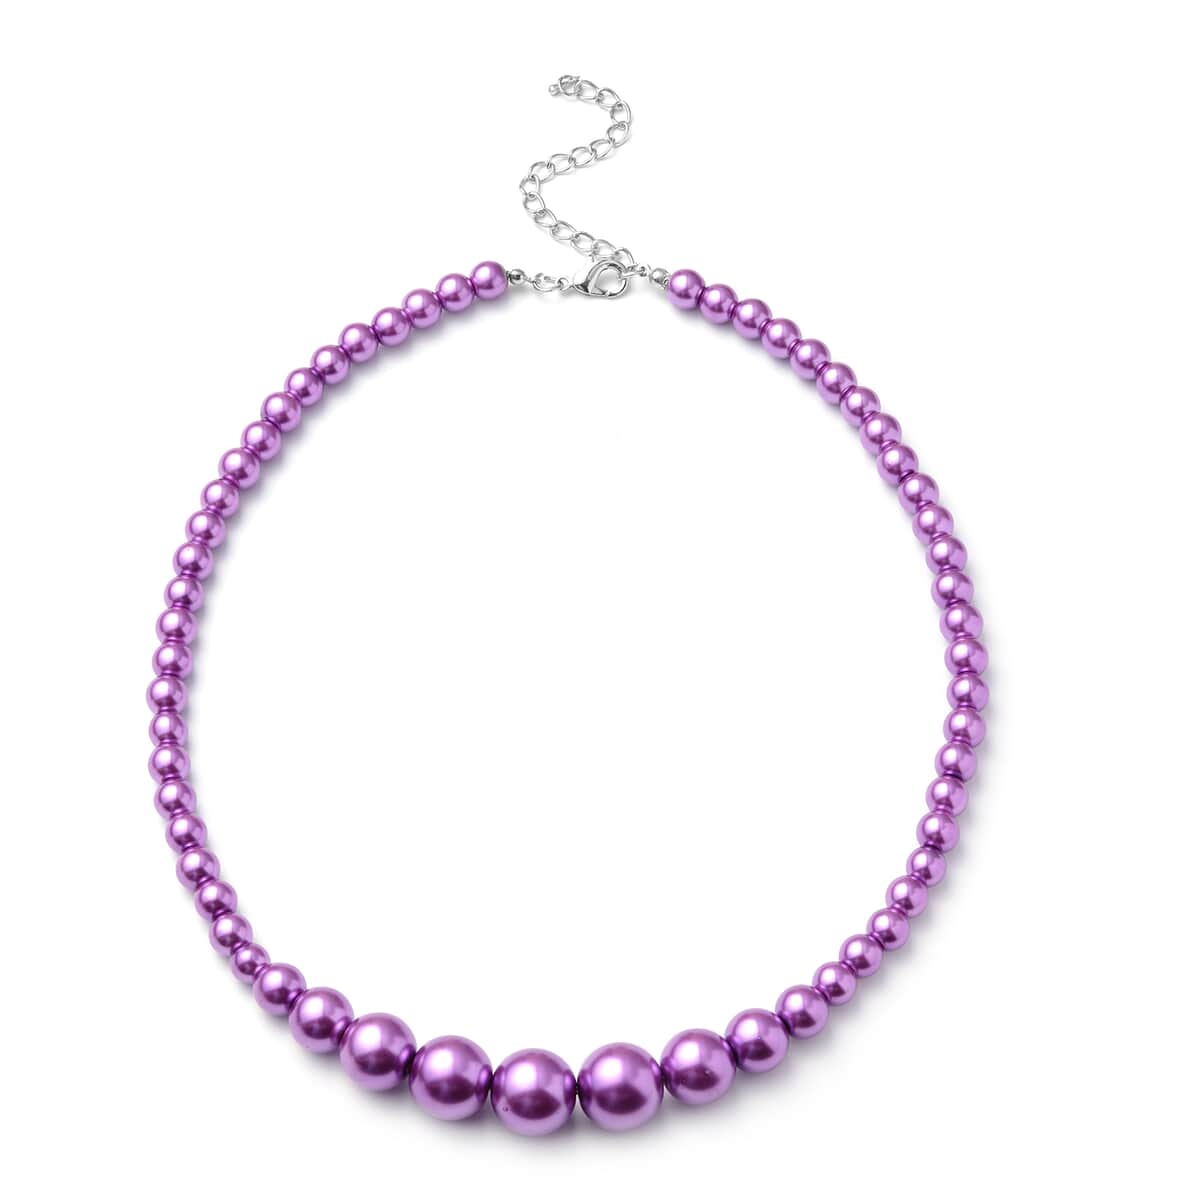 Set of 2 Simulated Purple Pearl Necklace 20-22 Inches and Earrings in Silvertone and Stainless Steel image number 2